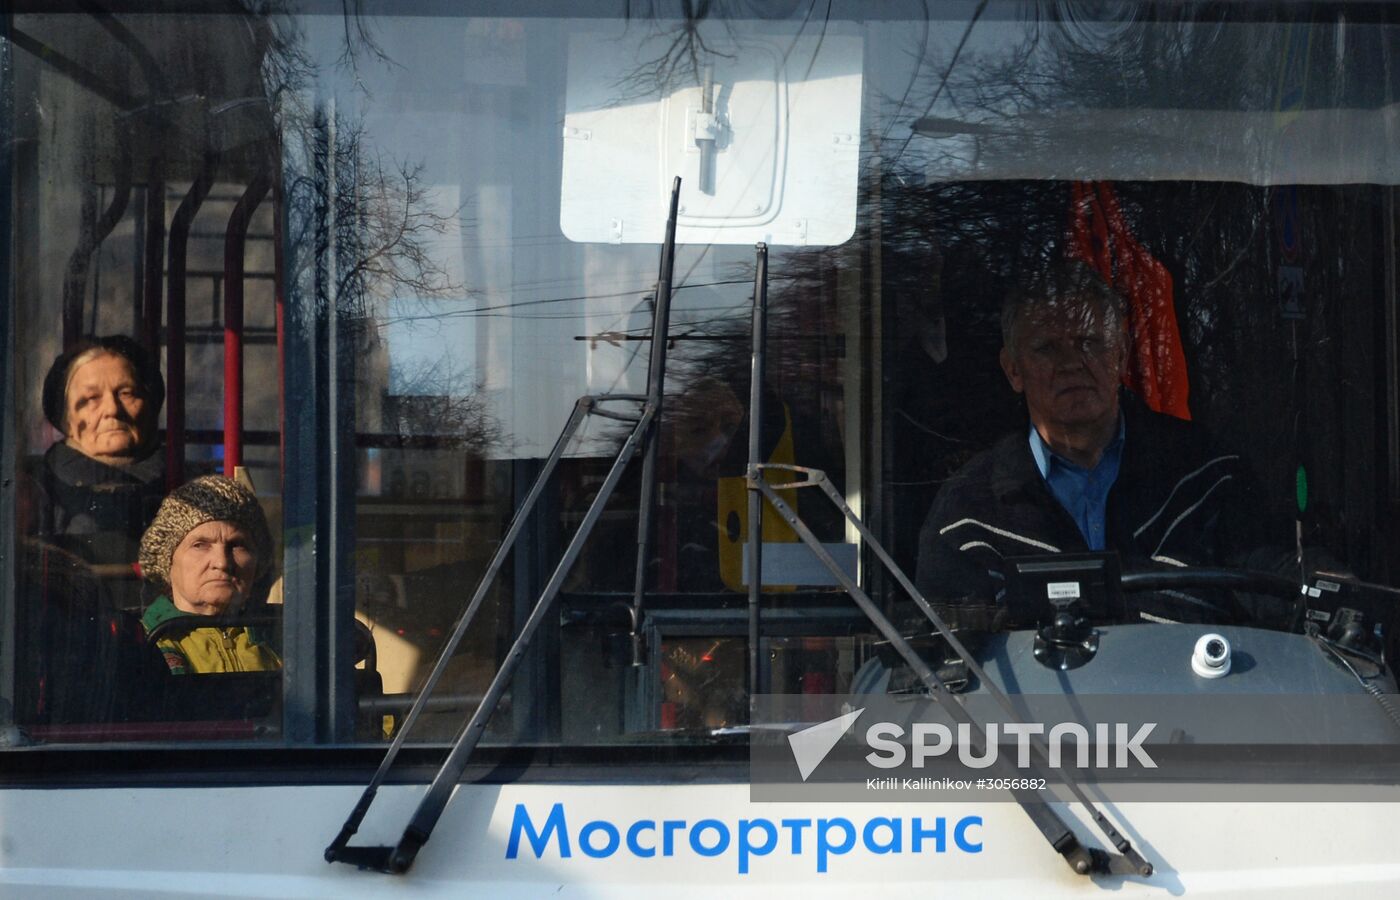 Moscow trolleybus